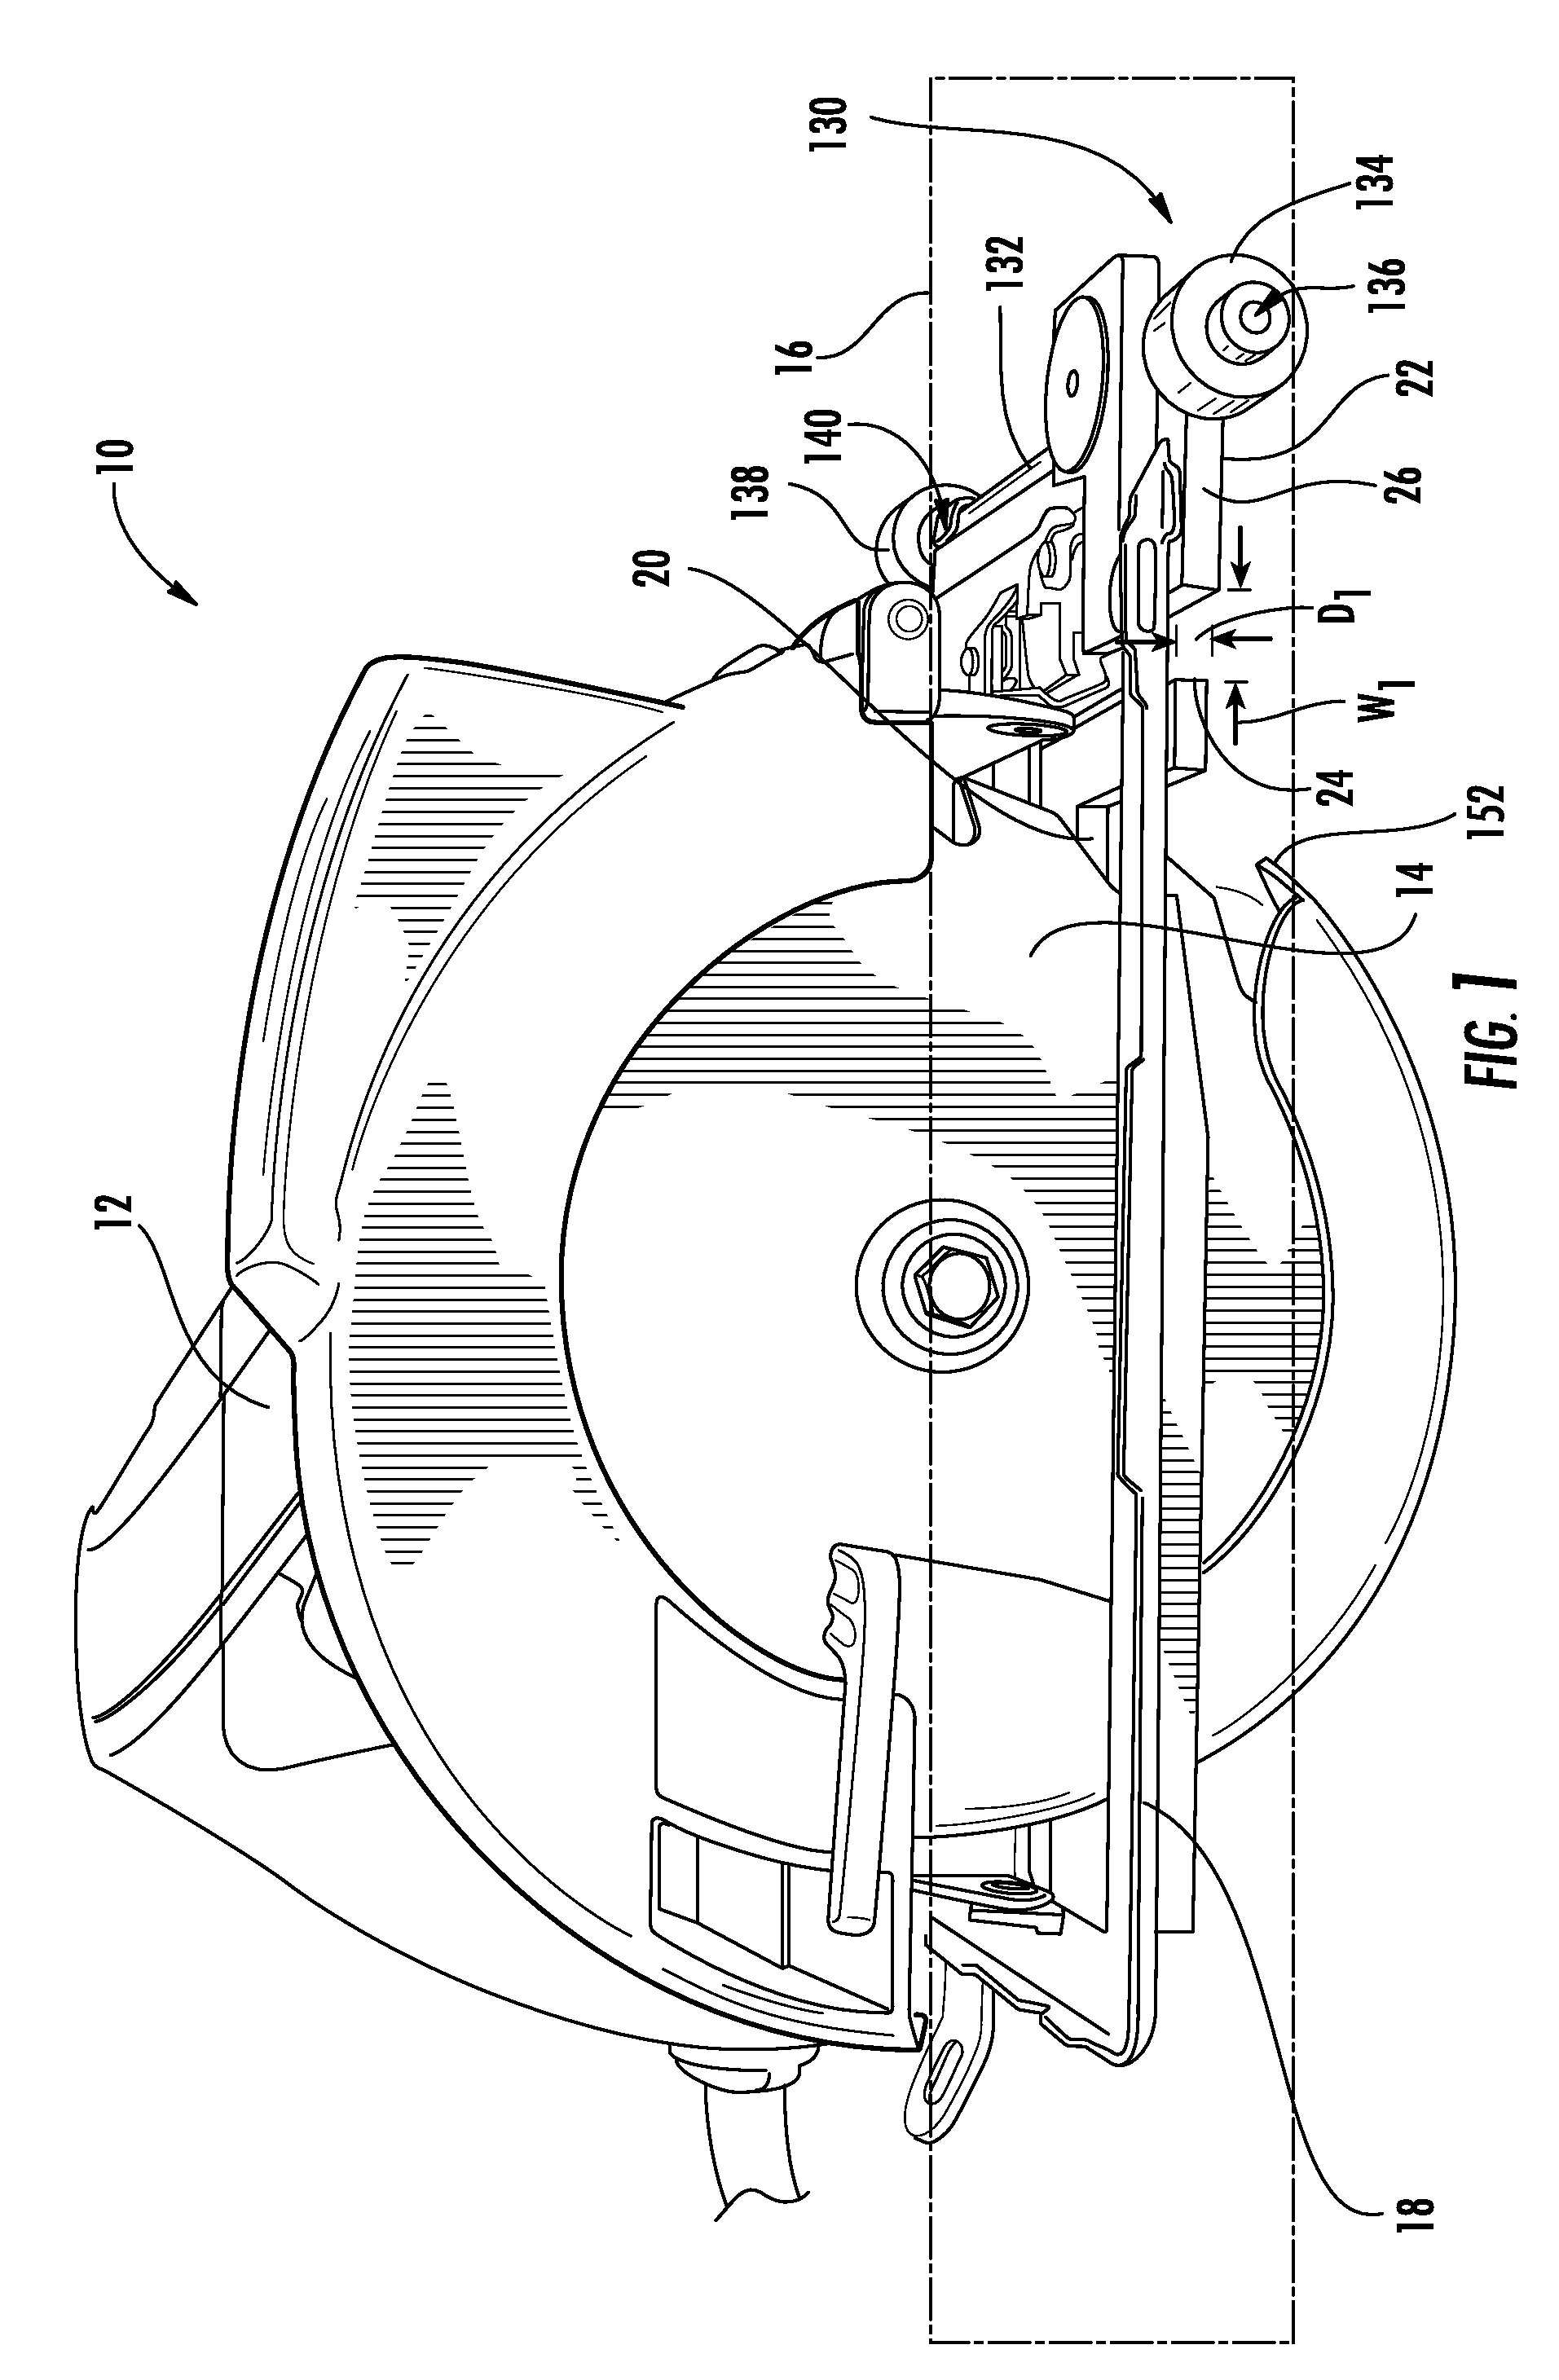 Cutting aid for a motorized saw